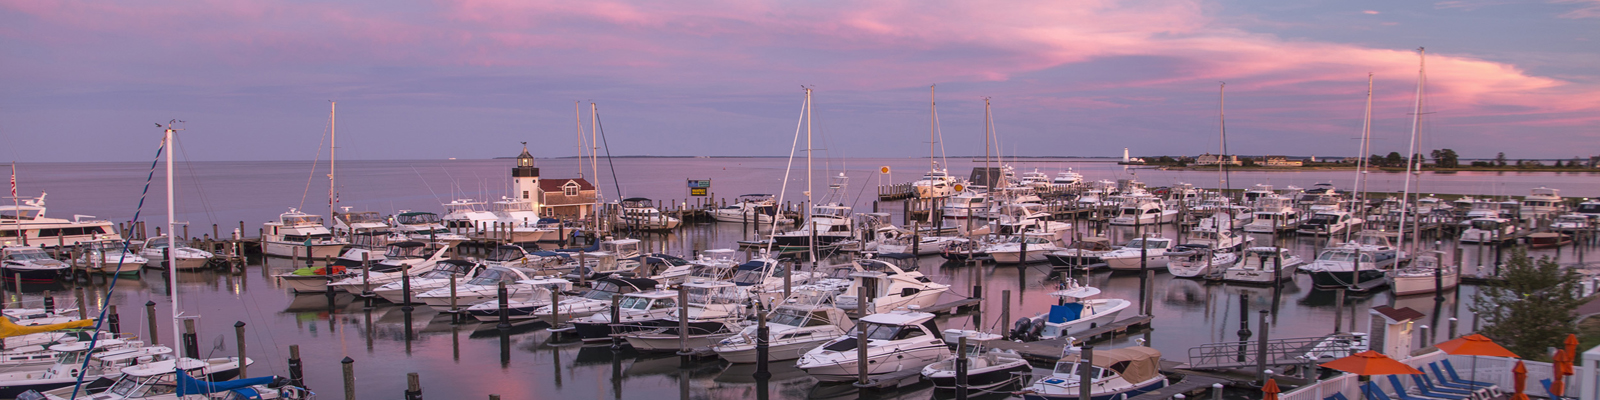 The Historic Seaside Town of Old Saybrook, Connecticut